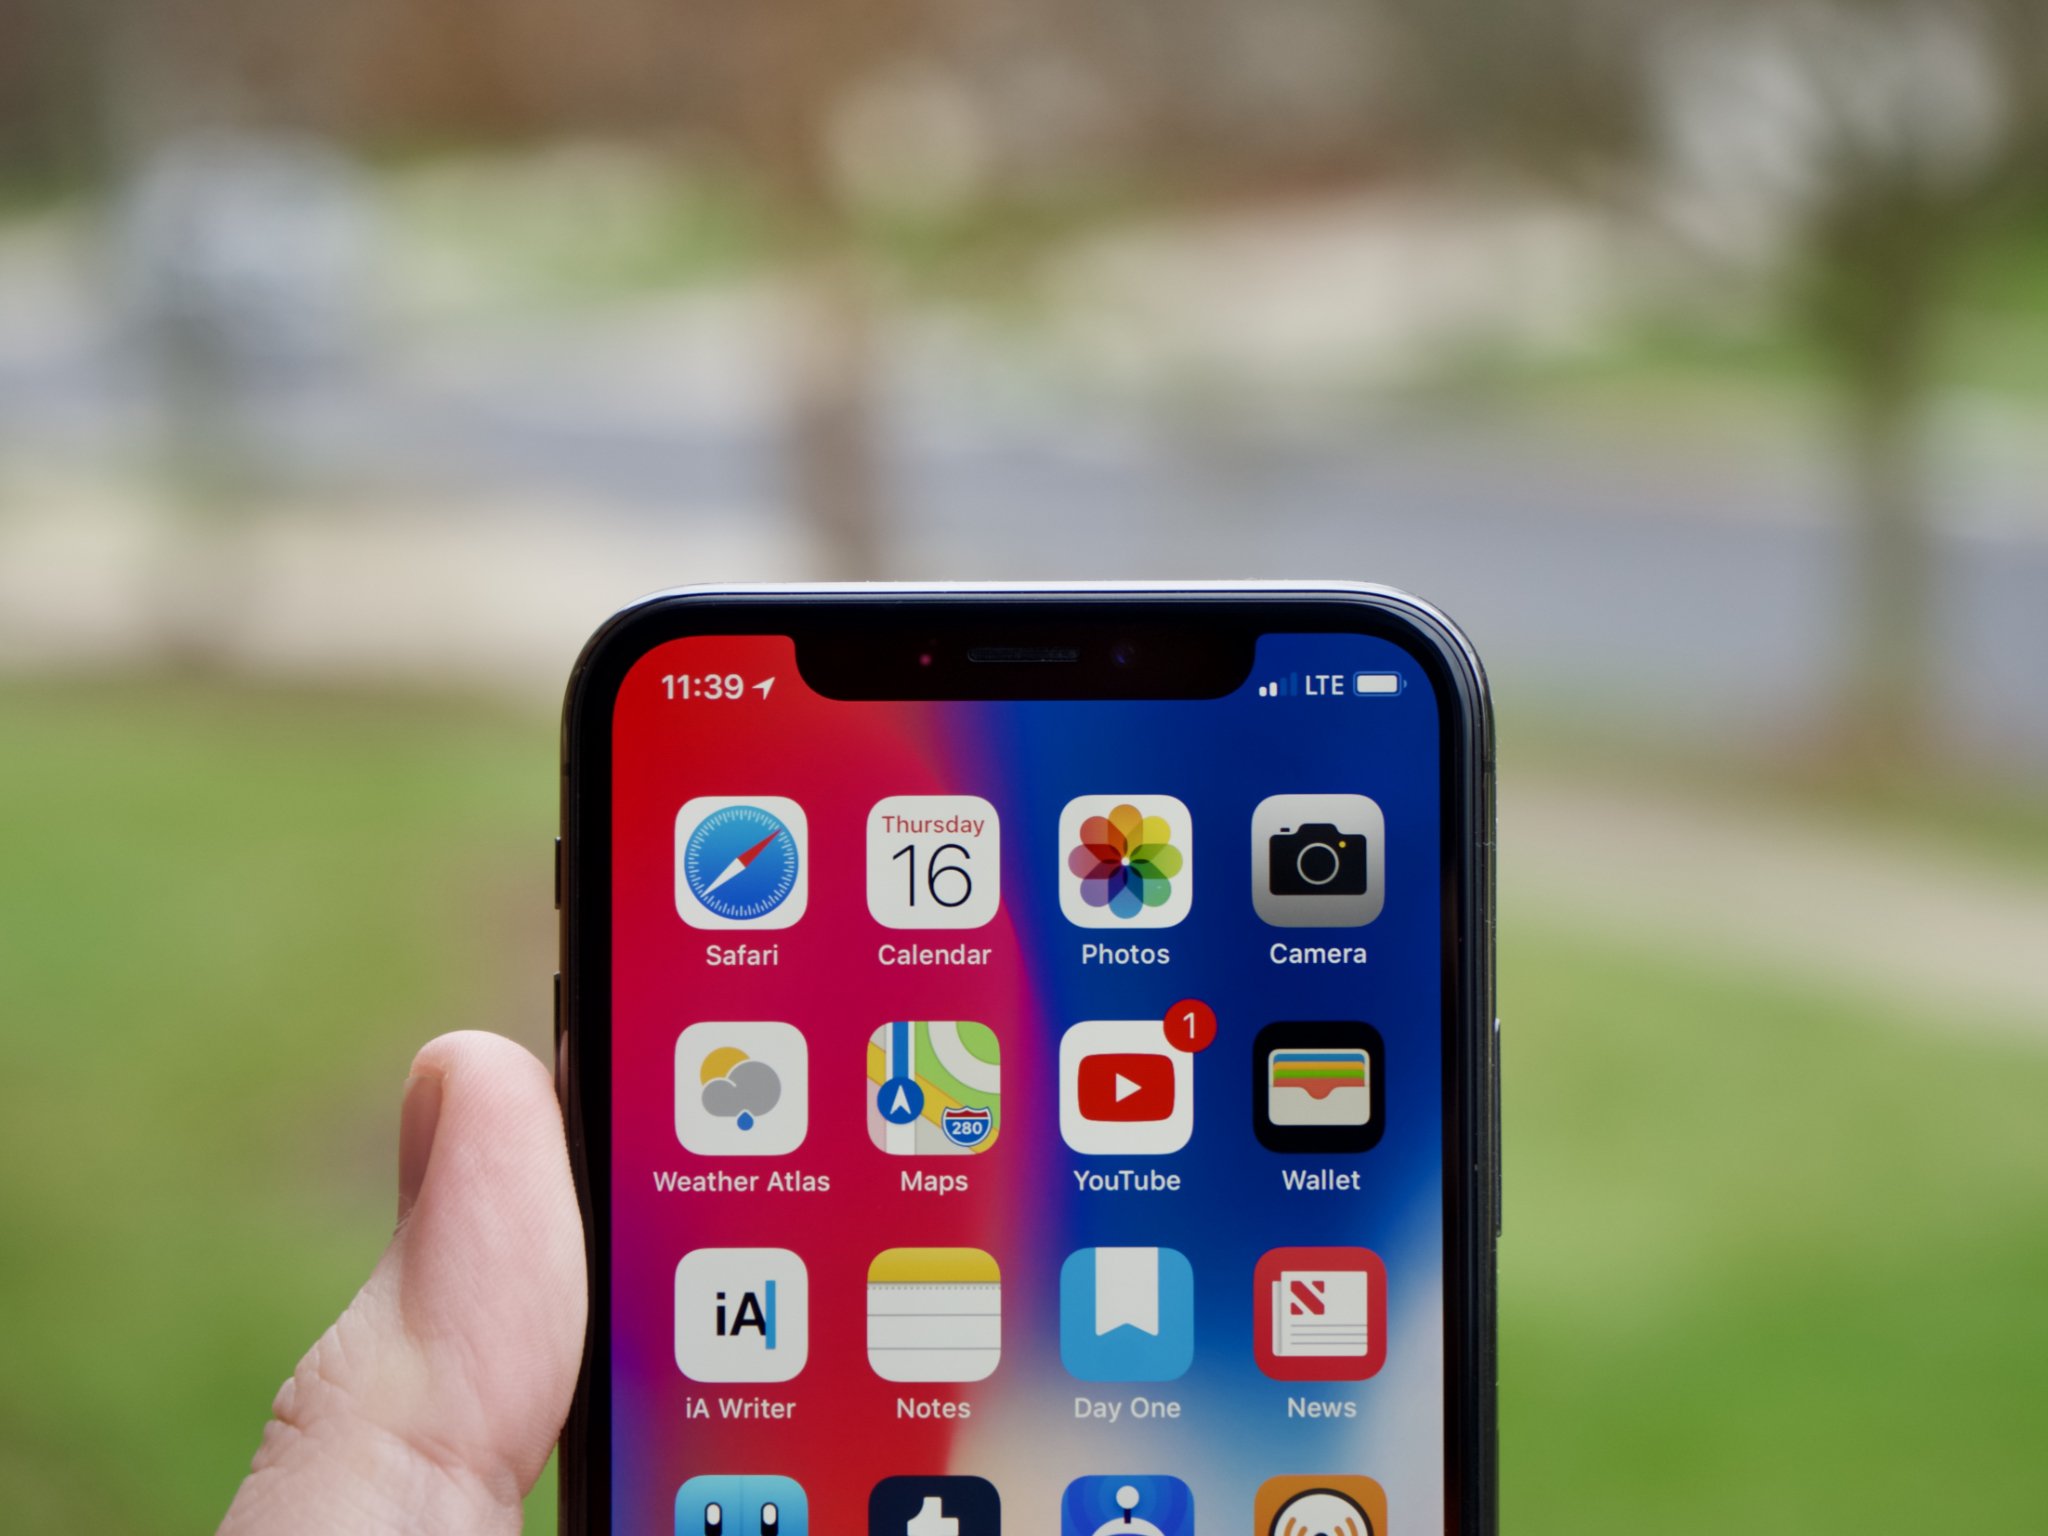 How to use Face ID on the iPhone X